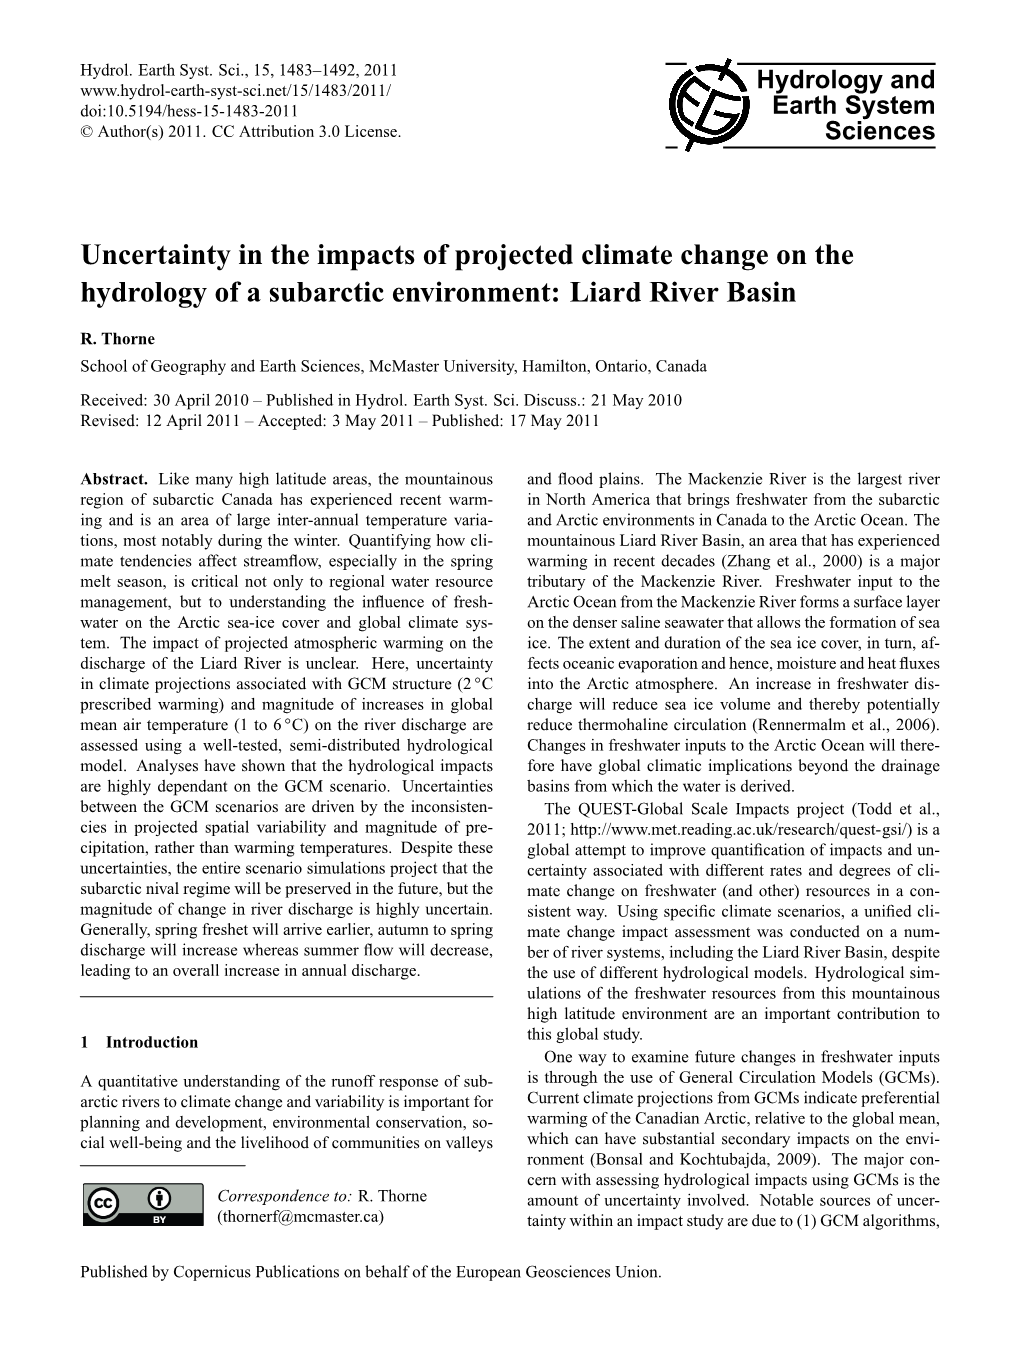 Uncertainty in the Impacts of Projected Climate Change on the Hydrology of a Subarctic Environment: Liard River Basin